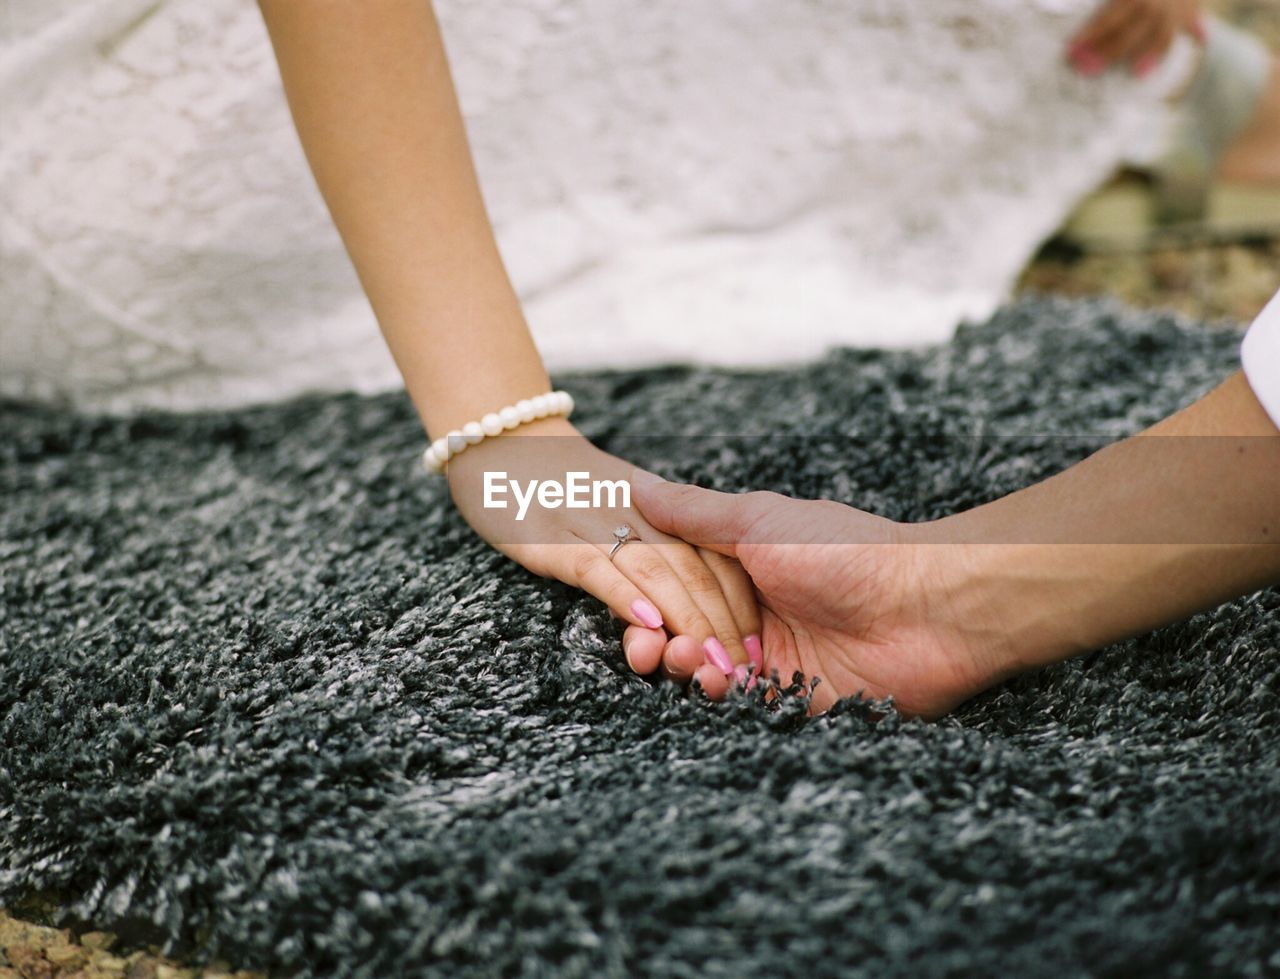 Cropped image of bridegroom holding hand of bride on carpet 